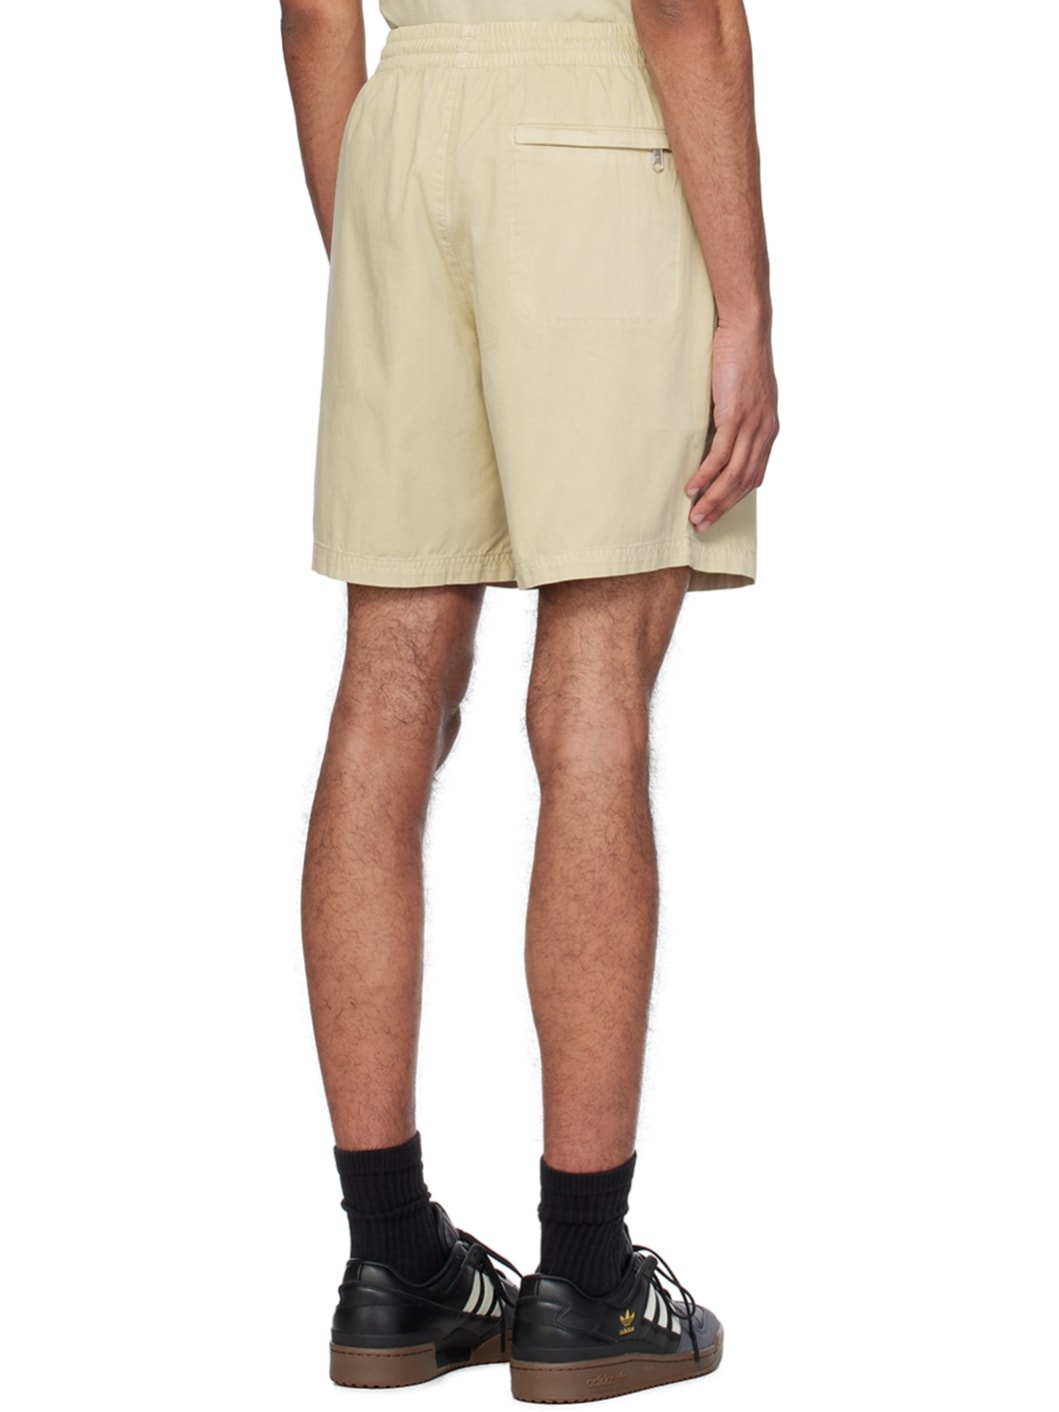 Beige Embroidered Shorts - 3